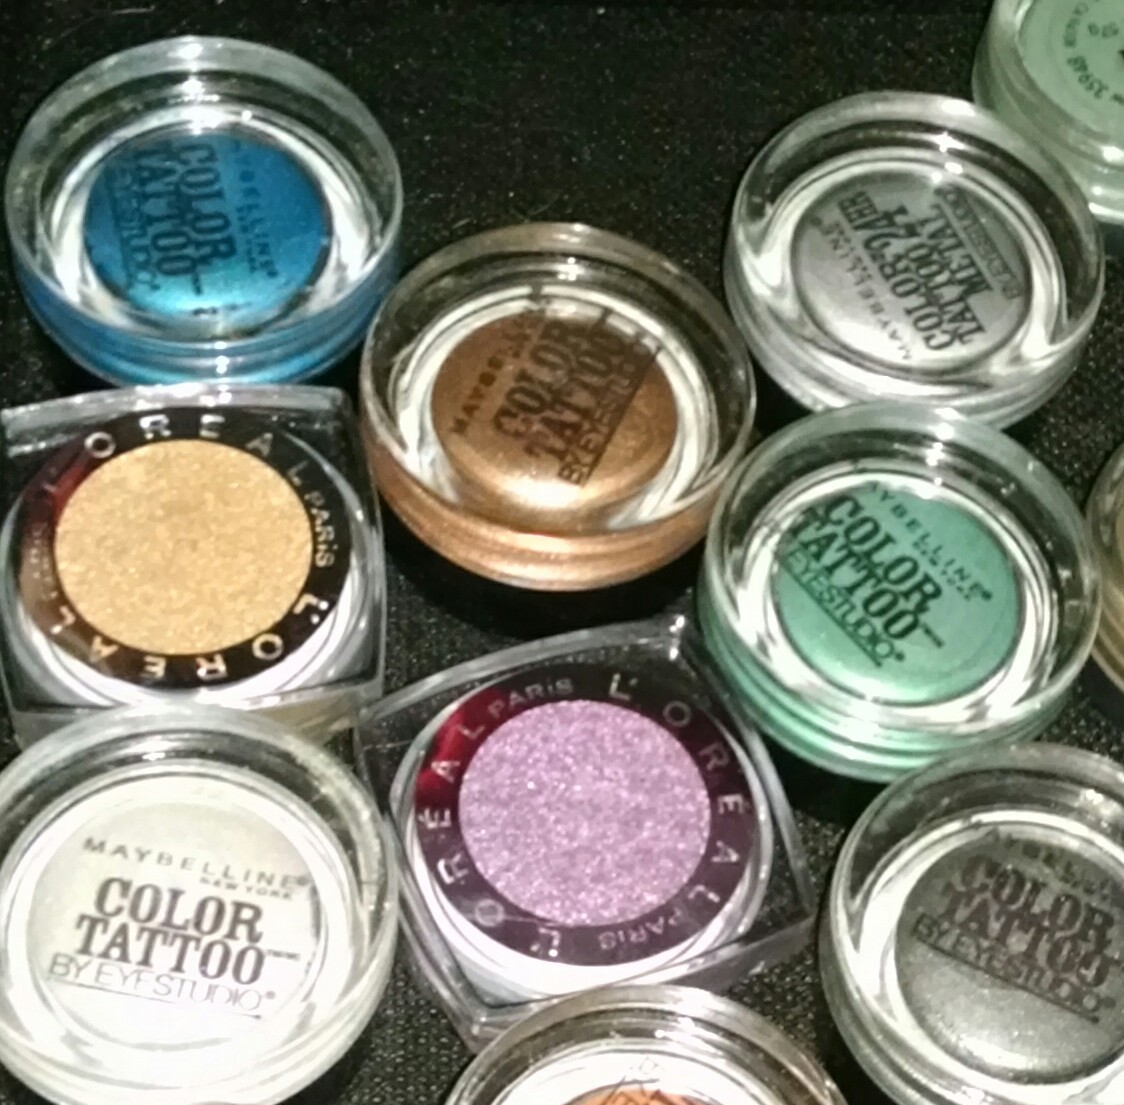 Maybelline Color Tattoo vs. L'Oreal Infallible Eye Shadow - Which is the Best Drugstore Eyeshadow?